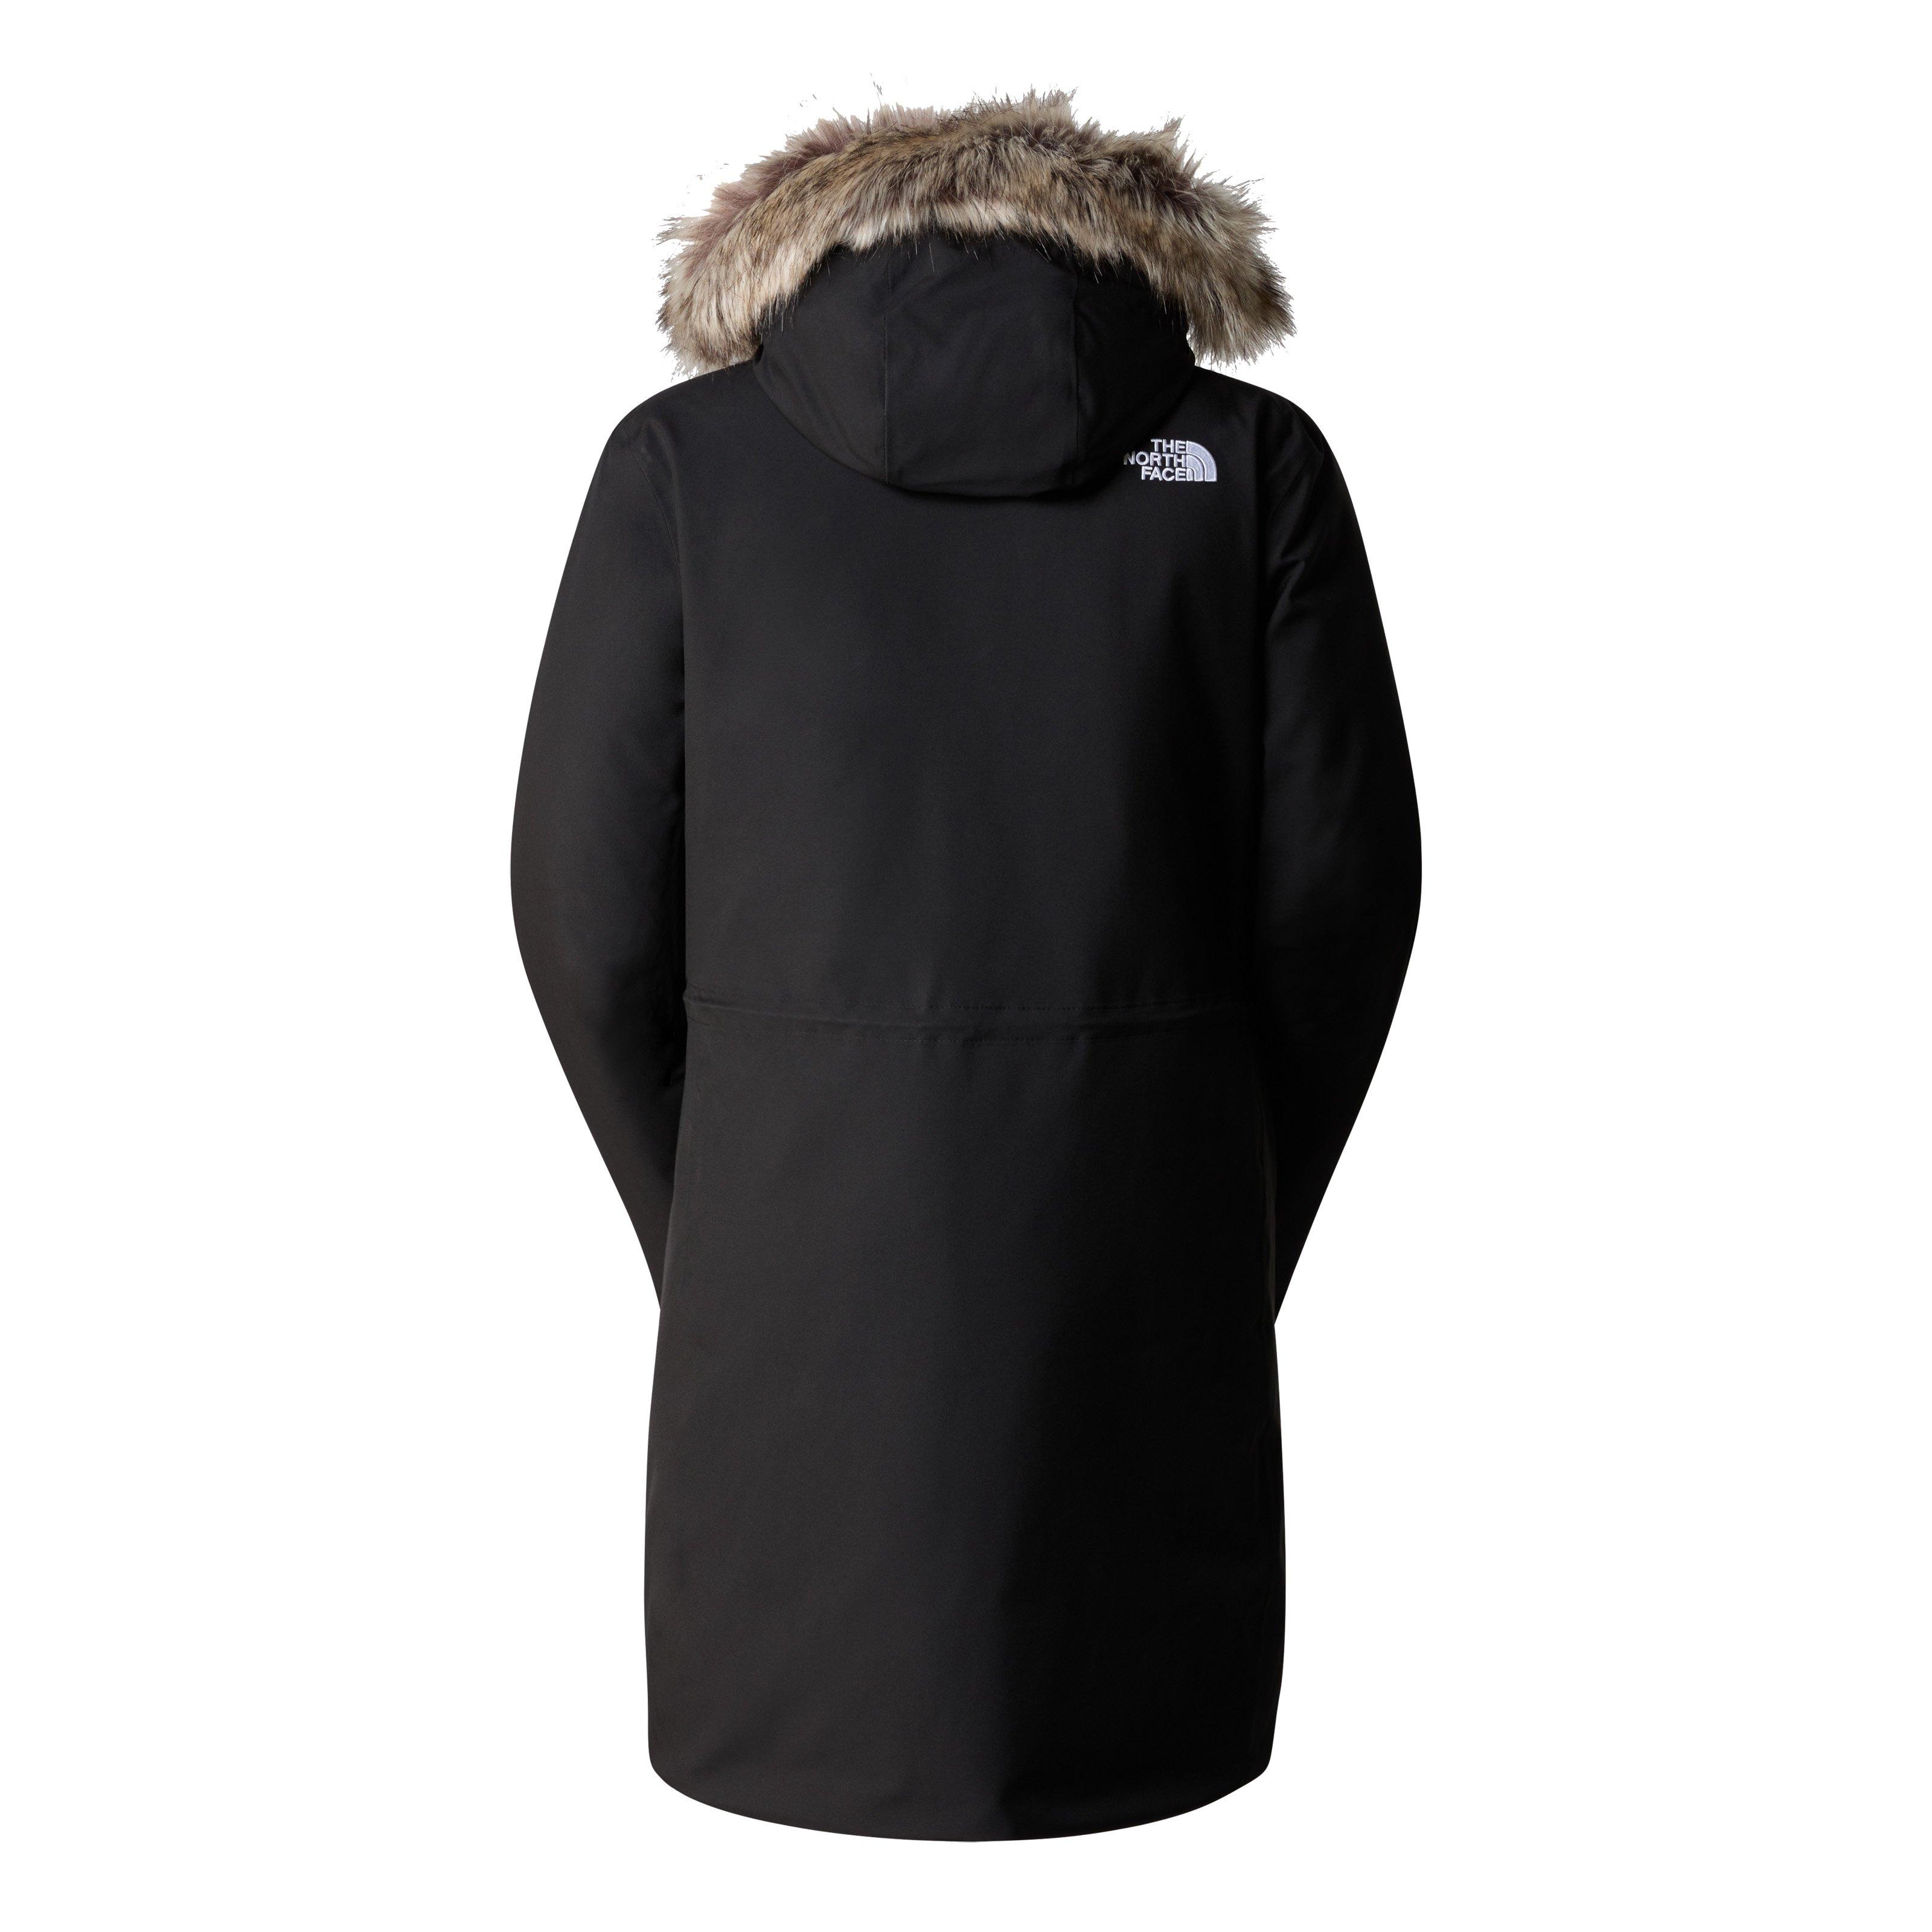 The North Face Women's Arctic Parka - Black | George Fisher